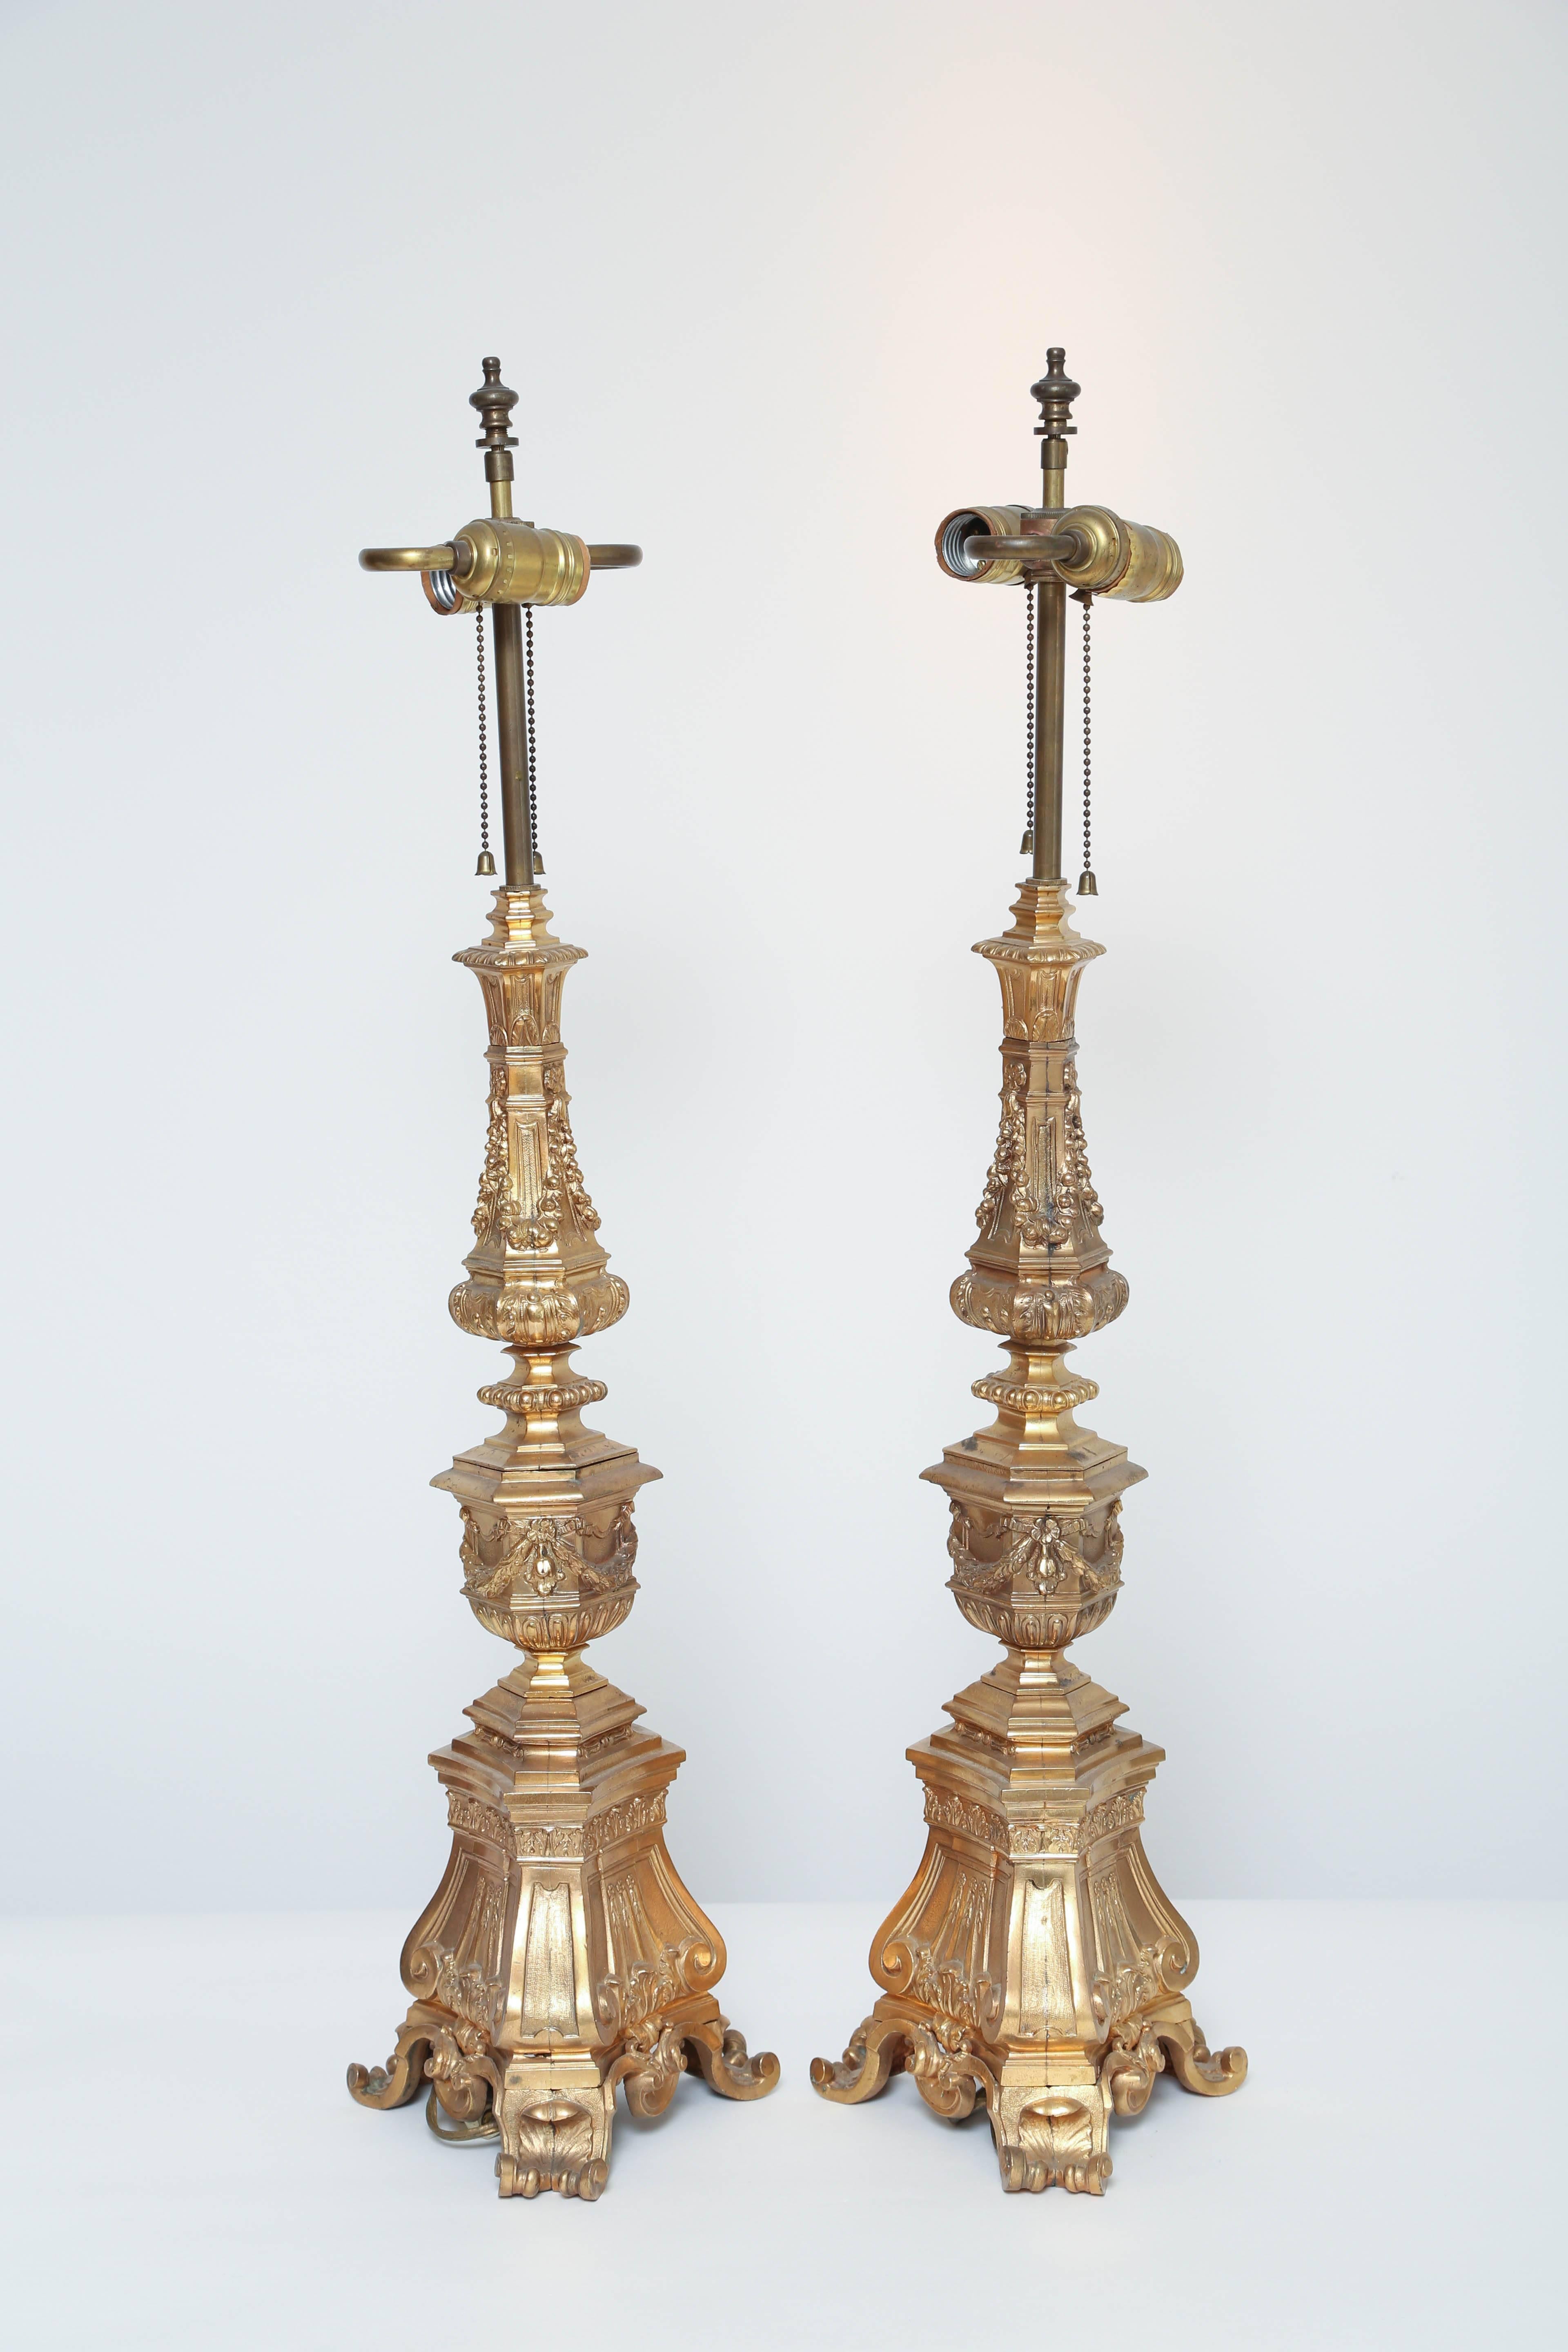 These large baroque style gilt bronze table lamps make a magnificent impression. They would be lovely with pastel silk lampshades.

Each is electrified with two sockets but rewiring is always recommended for older lamps.